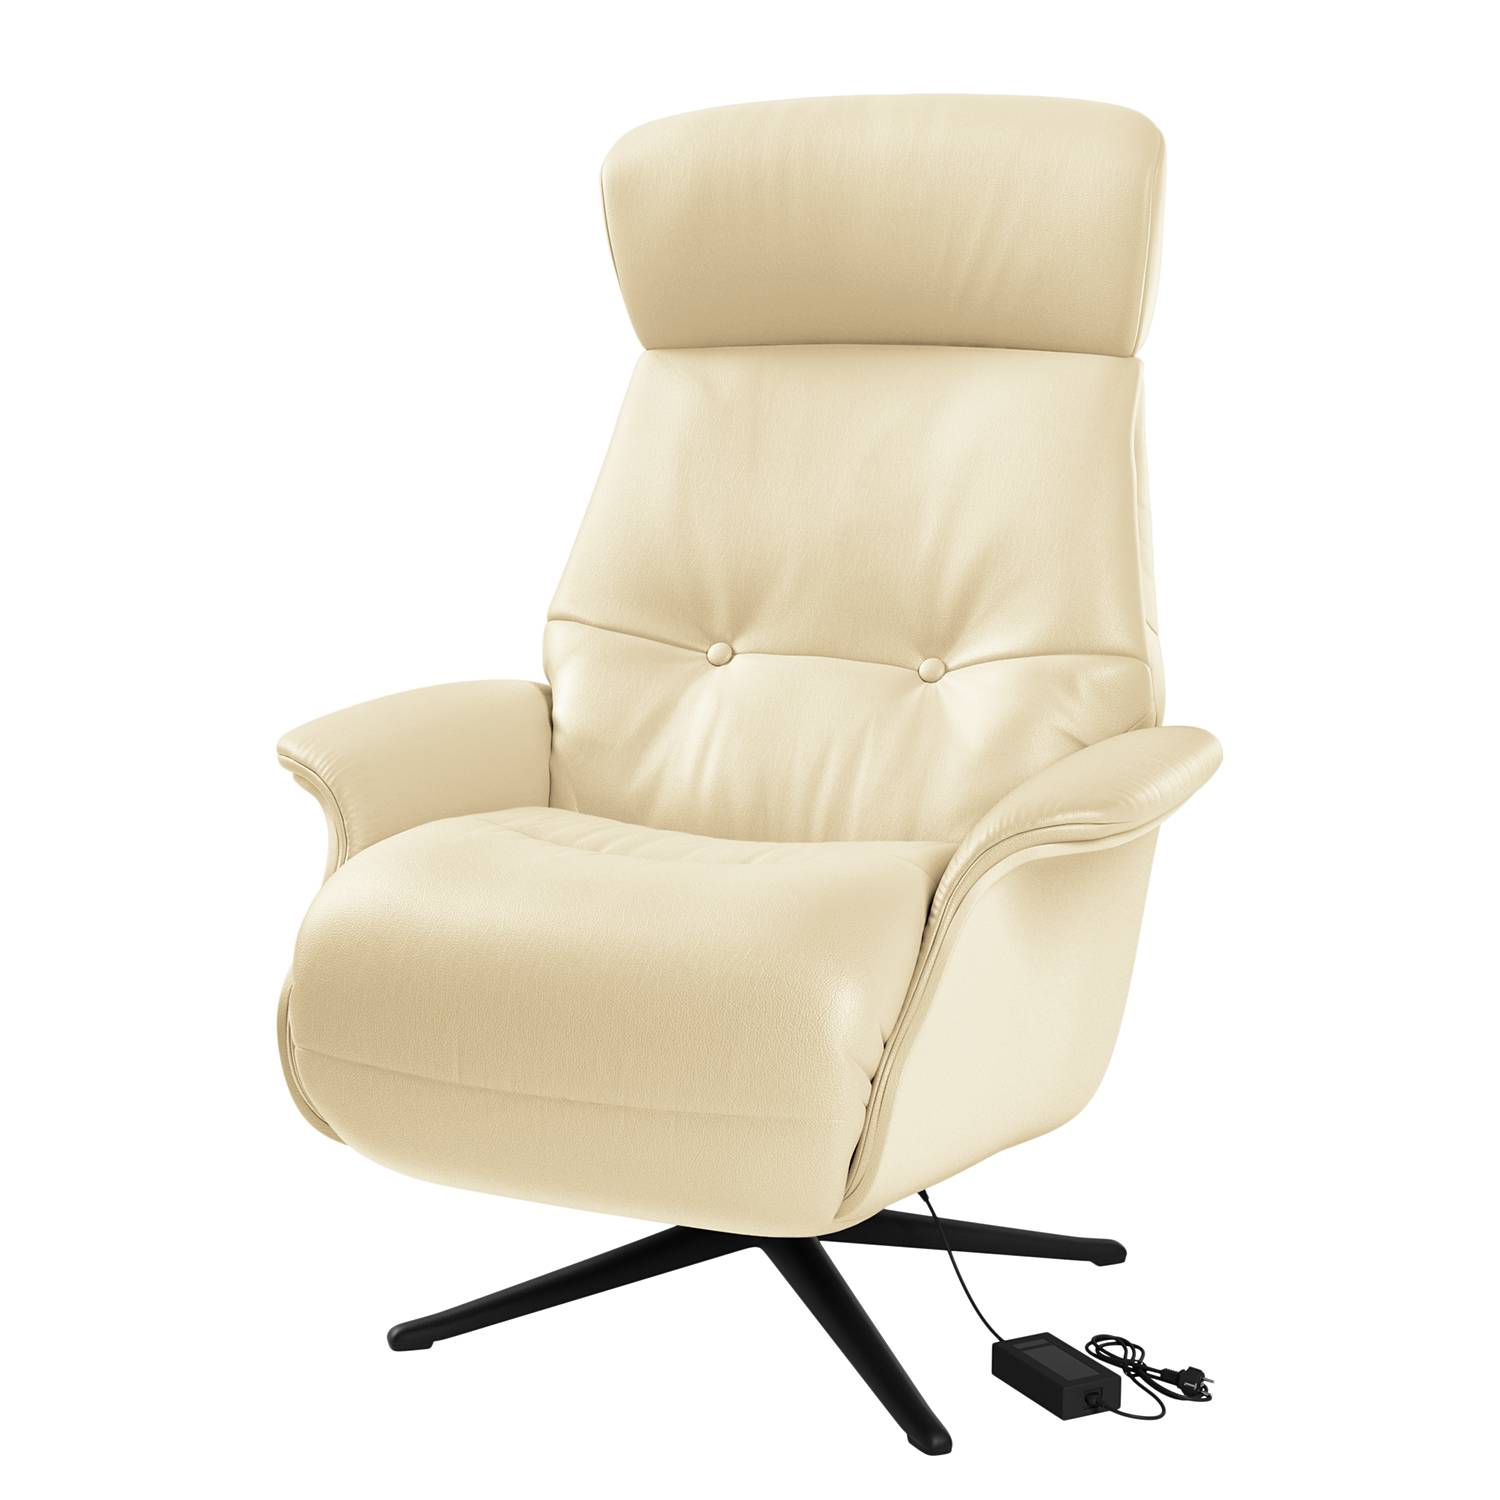 Image of Fauteuil relax Anderson VI 000000001000131467